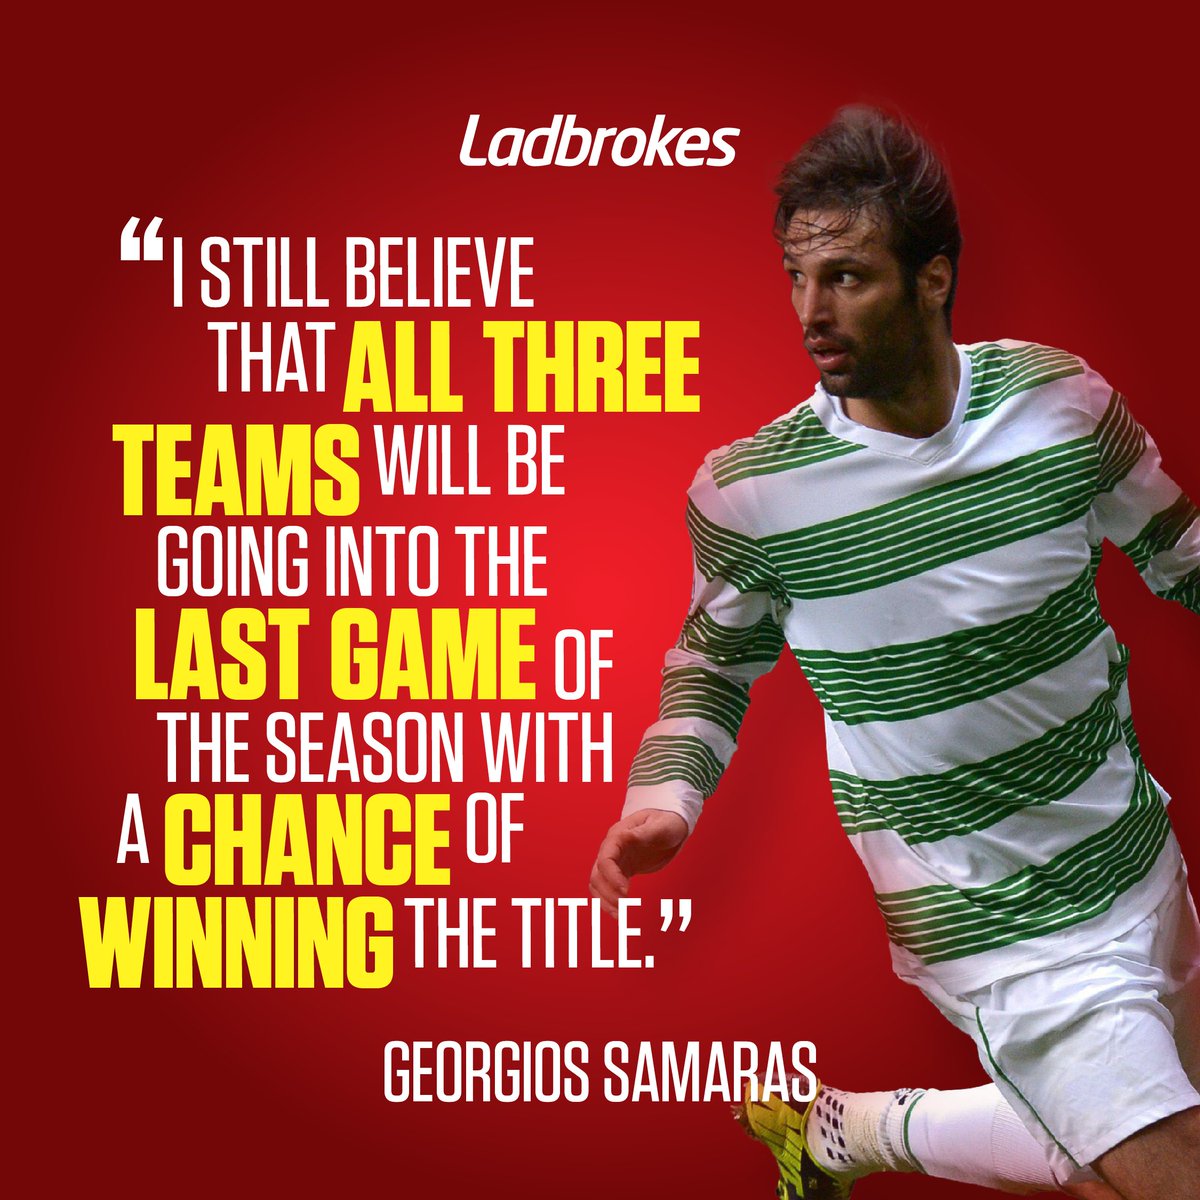 A three-way fight for the title on the final day? We’ll take that Georgios! #Ladbrokes